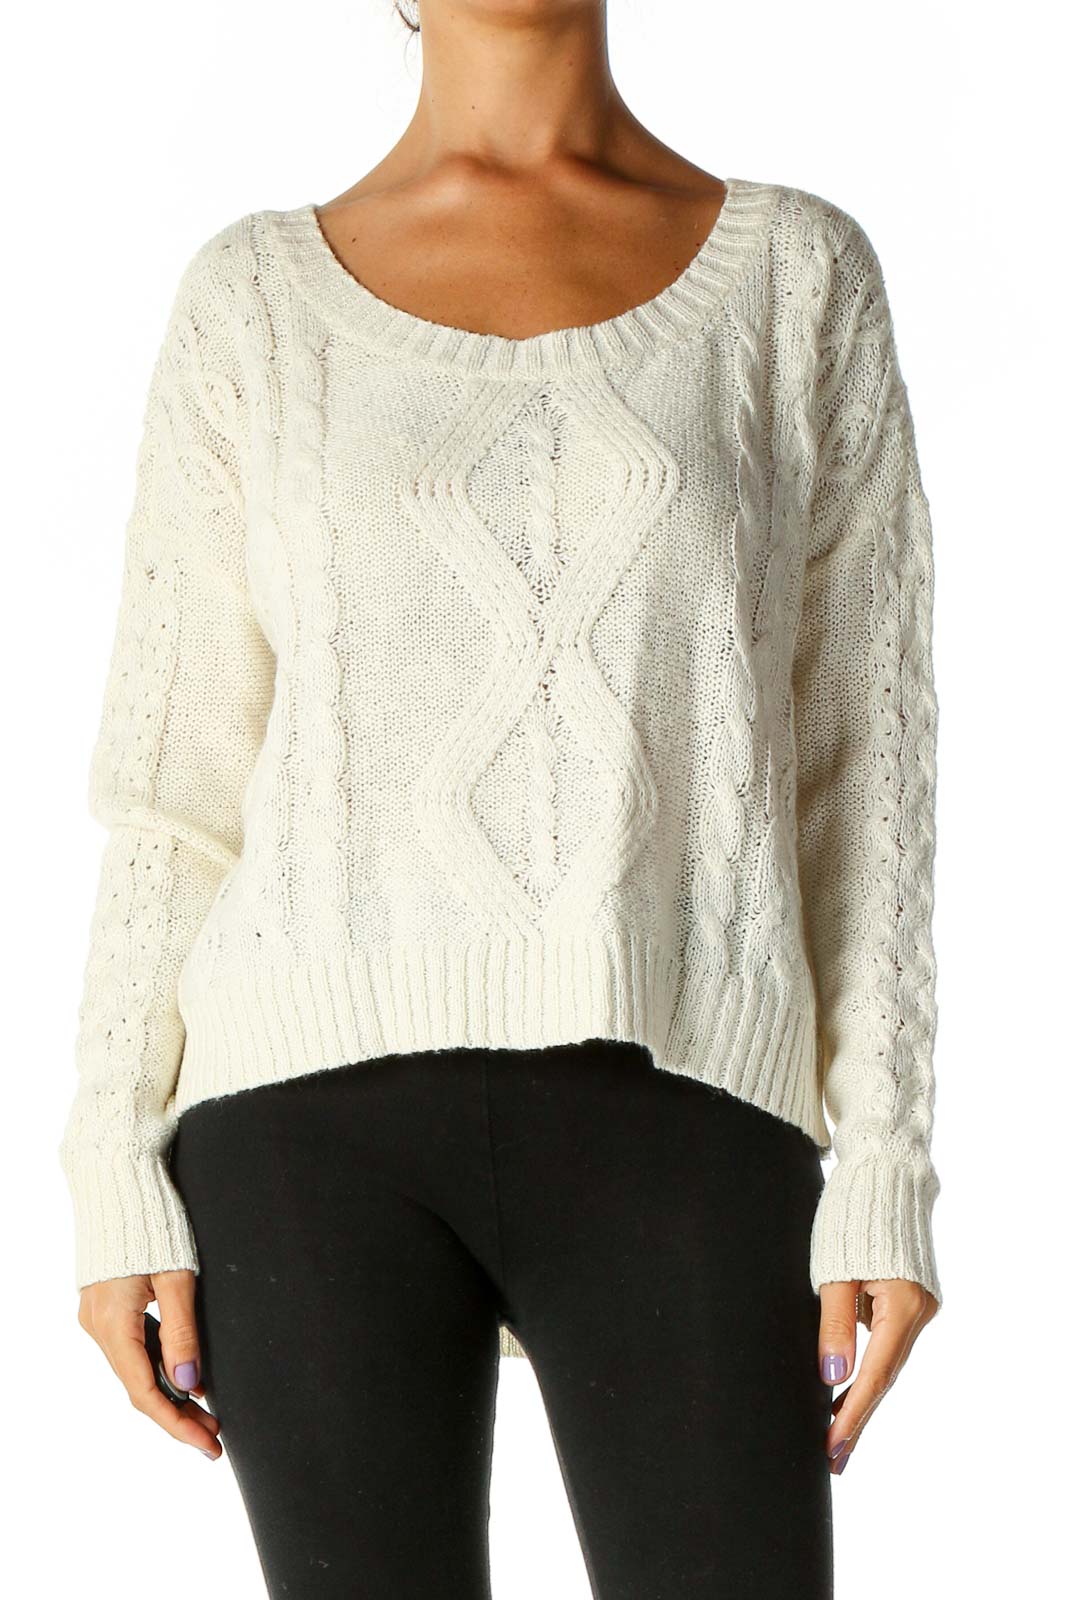 Beige Textured Casual Sweater Front